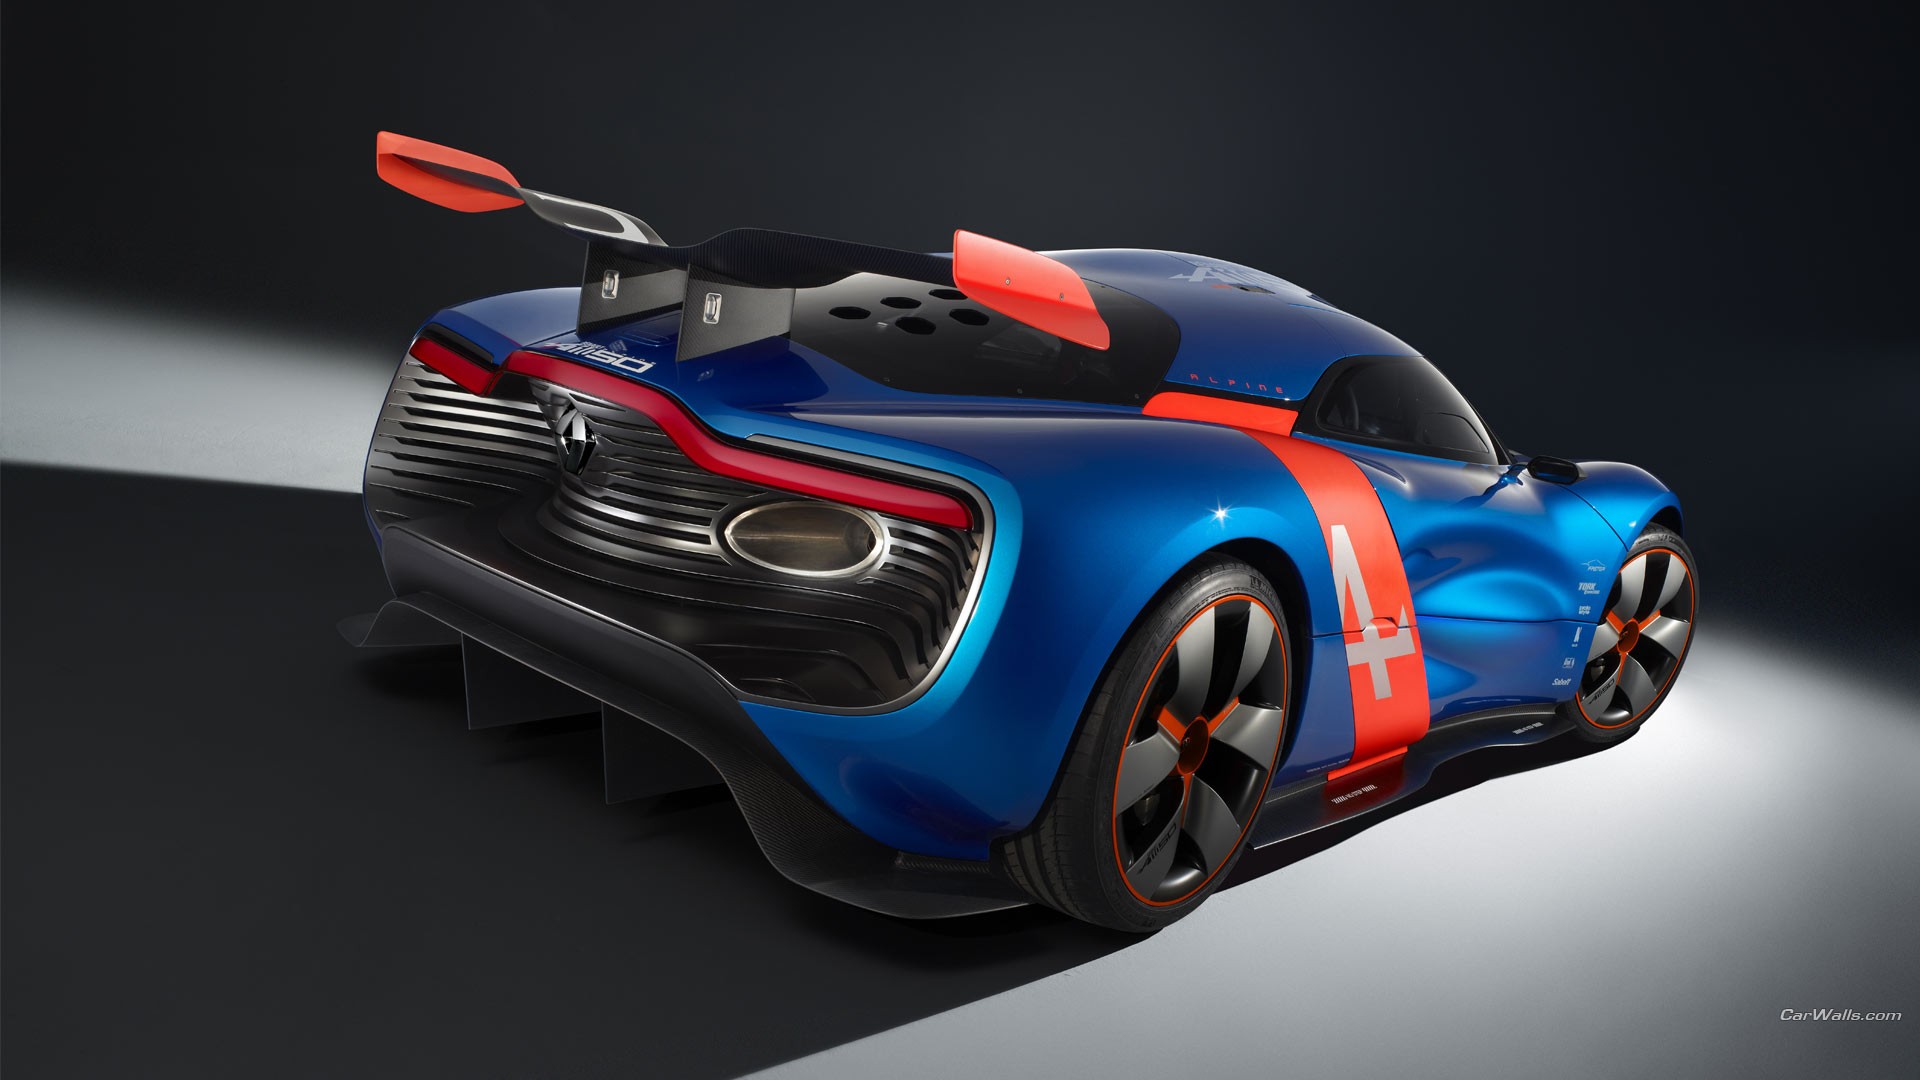 General 1920x1080 car Renault Alpine blue cars Renault vehicle simple background French Cars concept cars Alpine A110-50 watermarked car spoiler